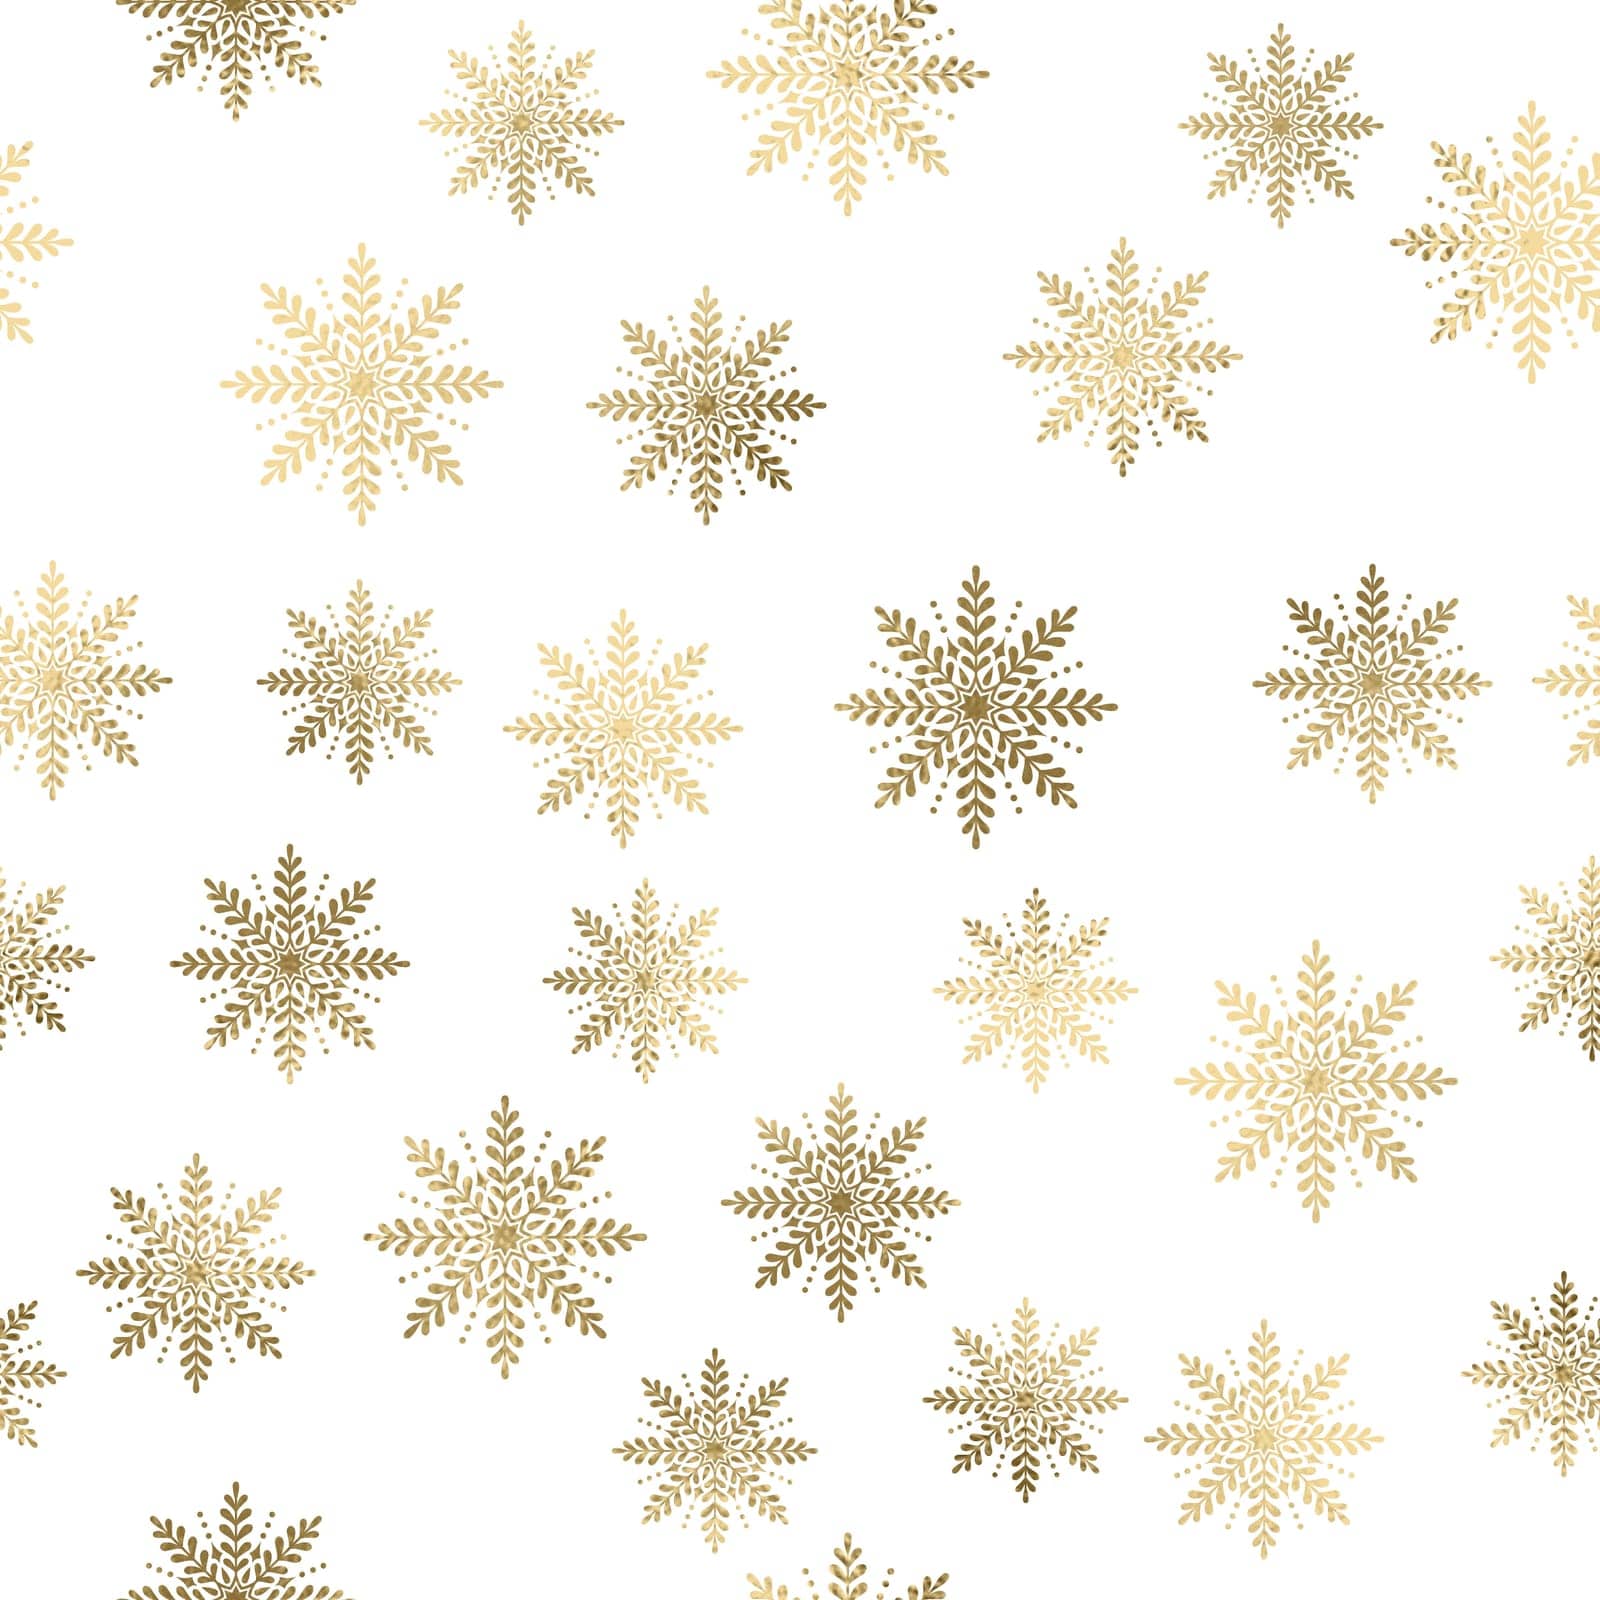 Golden snowflakes over layer by manudoodle